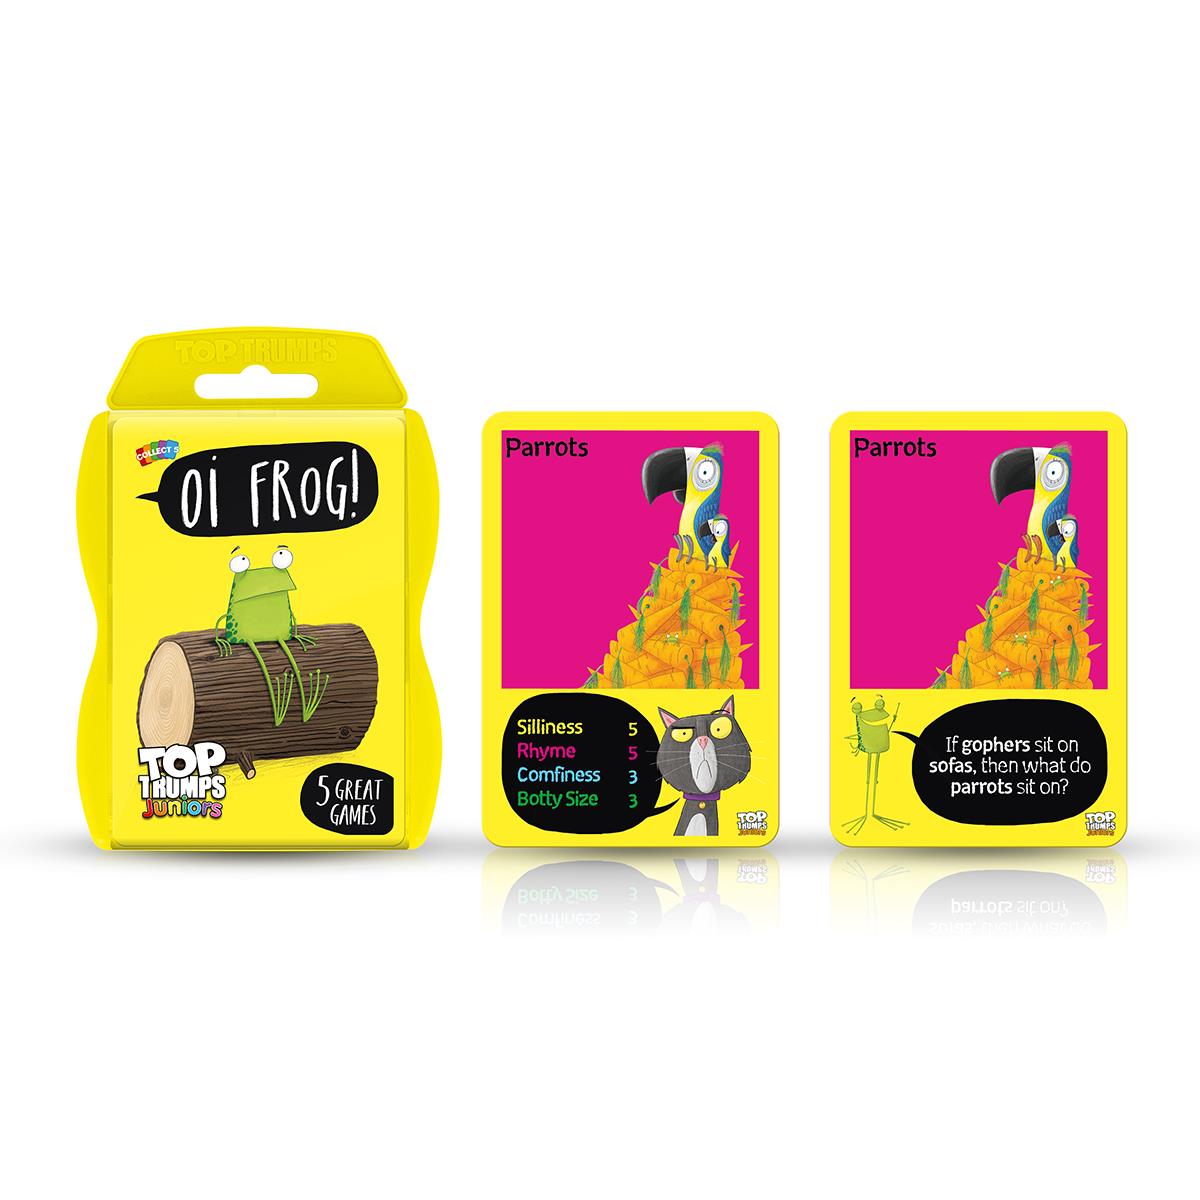 Oi Frog Top Trumps Junior Card Game